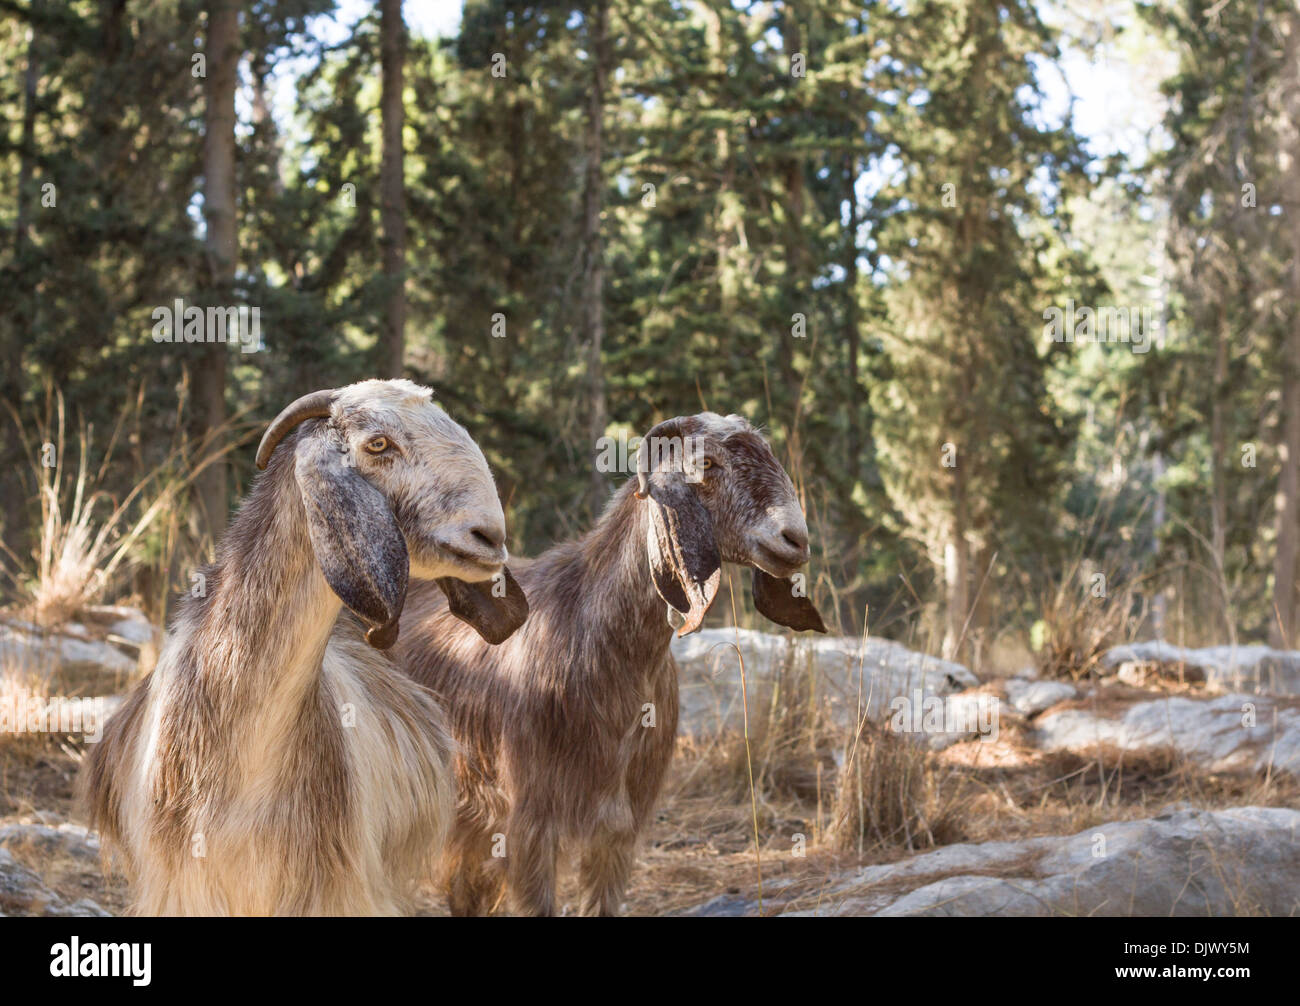 Beautiful photos of goats grazing in the forest. Israel. Stock Photo